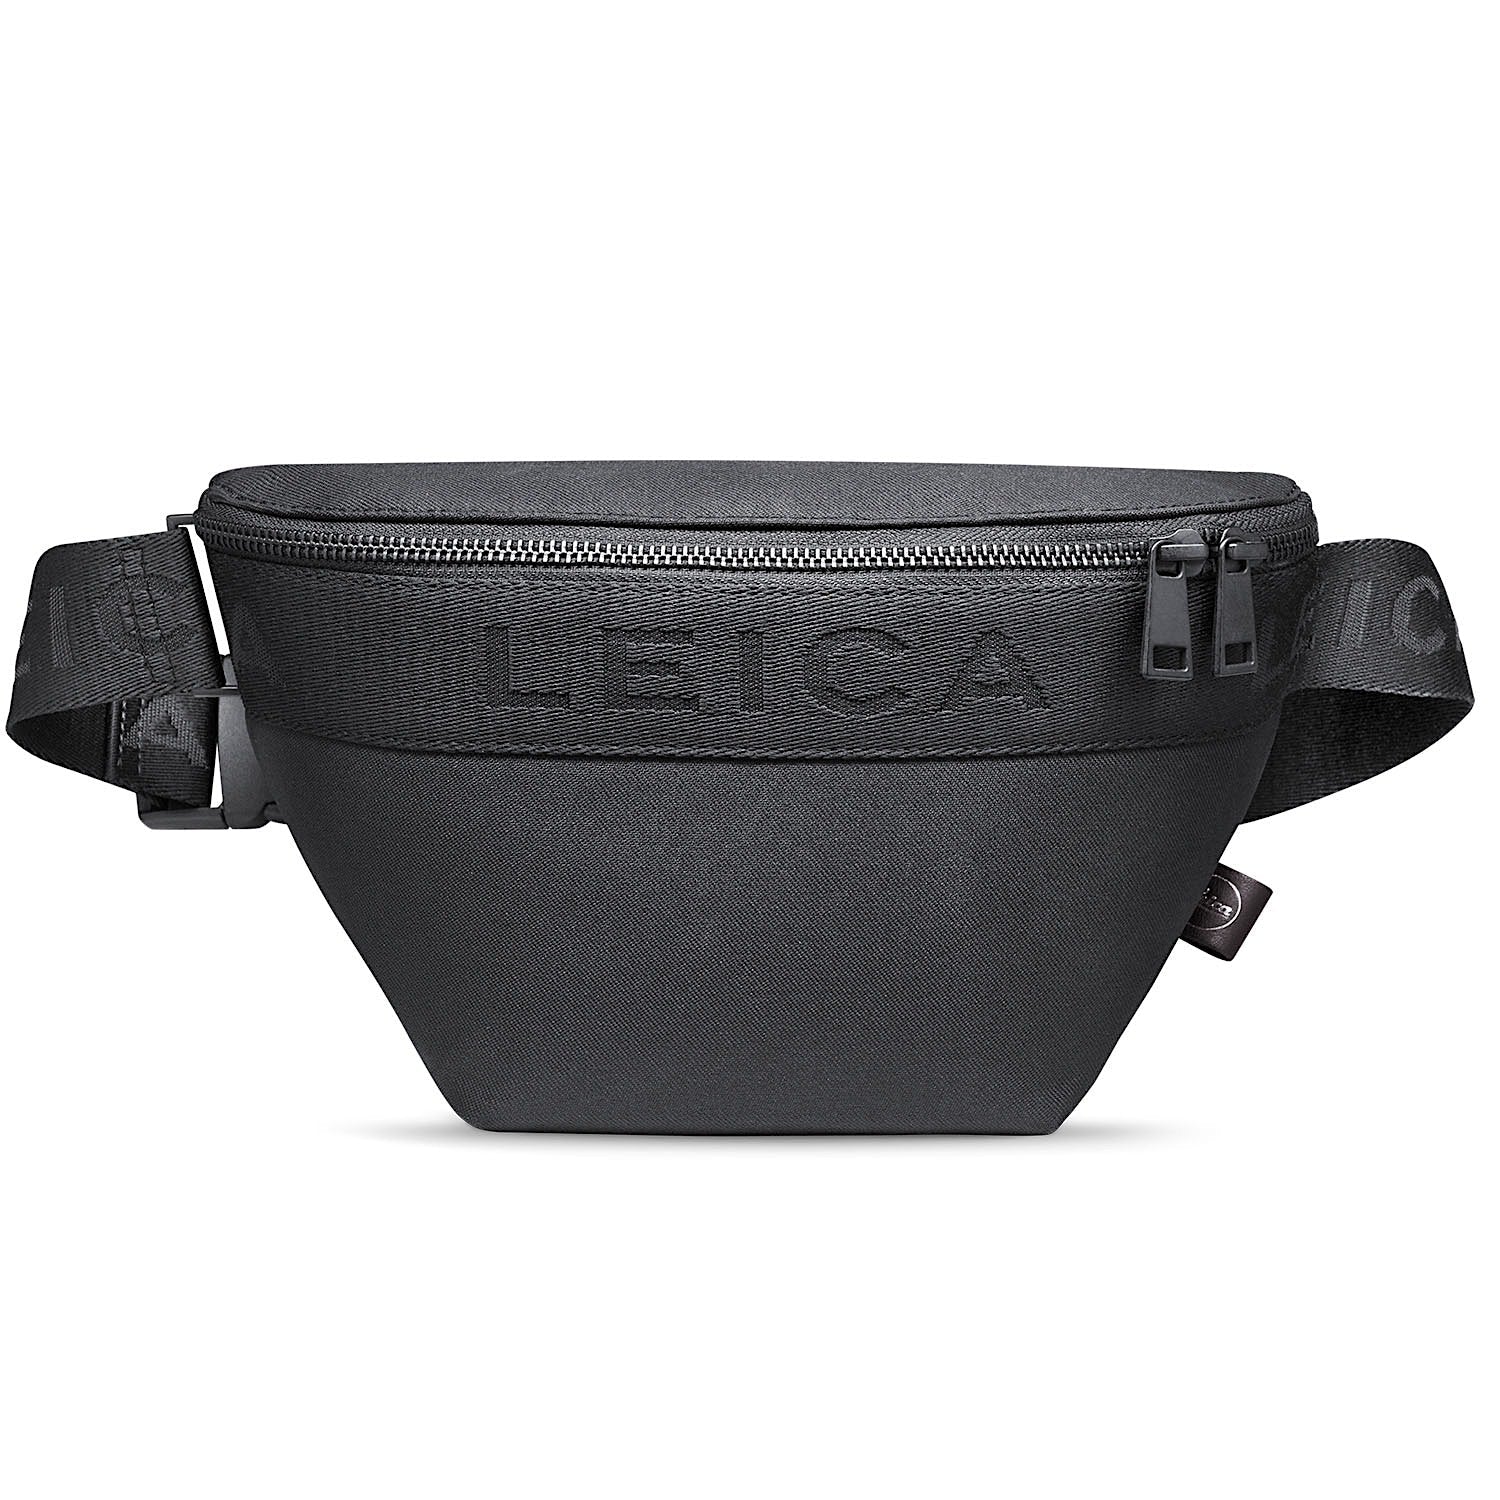 Leica Hip Bag SOFORT, Recycled Polyester, Black